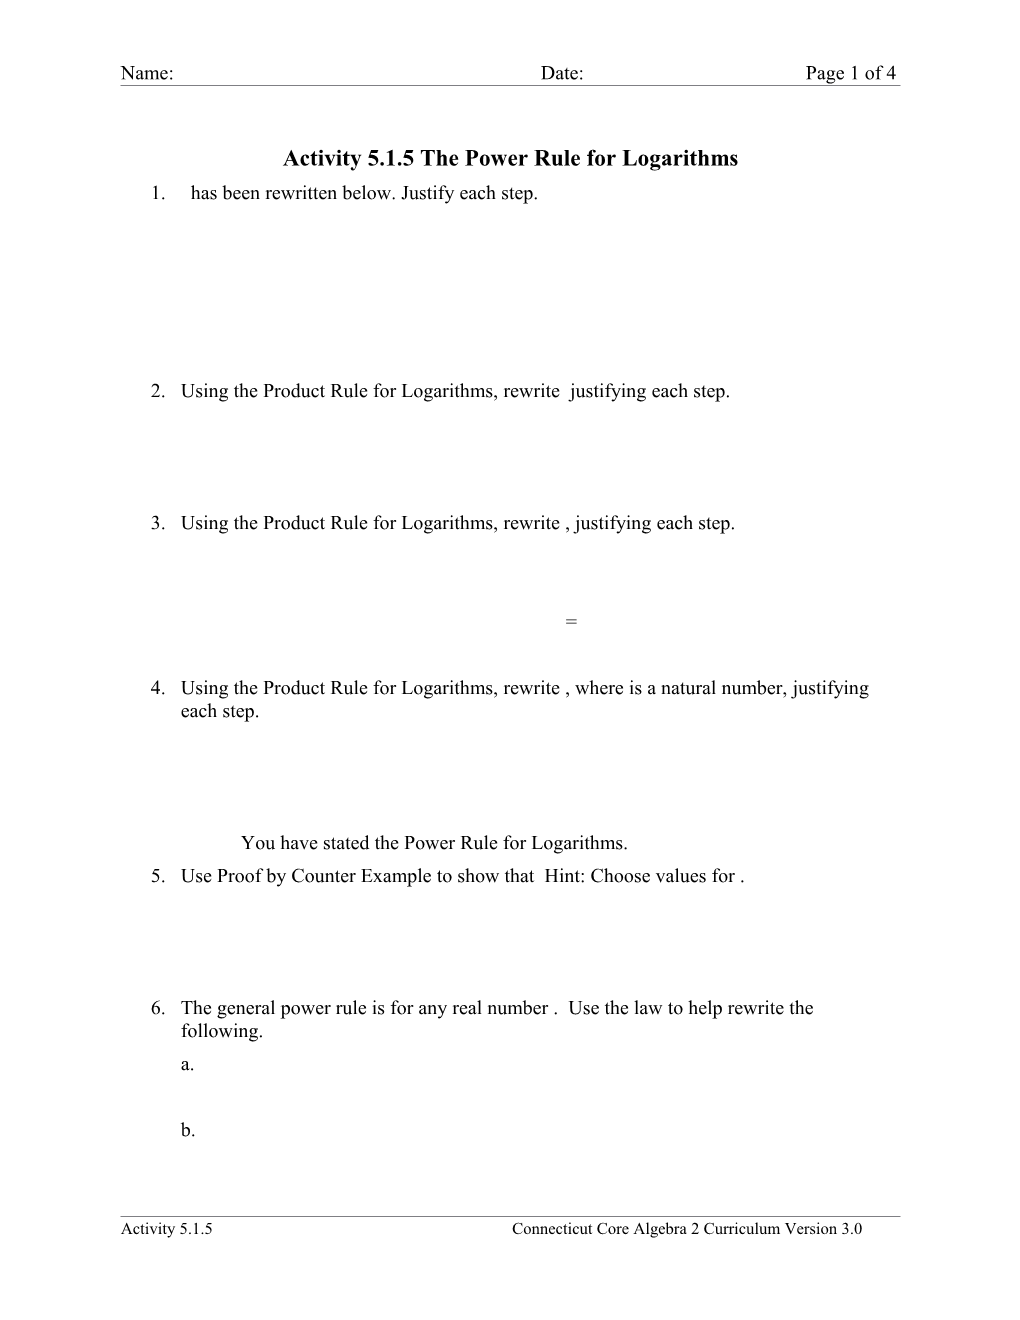 Activity 5.1.5 the Power Rule for Logarithms